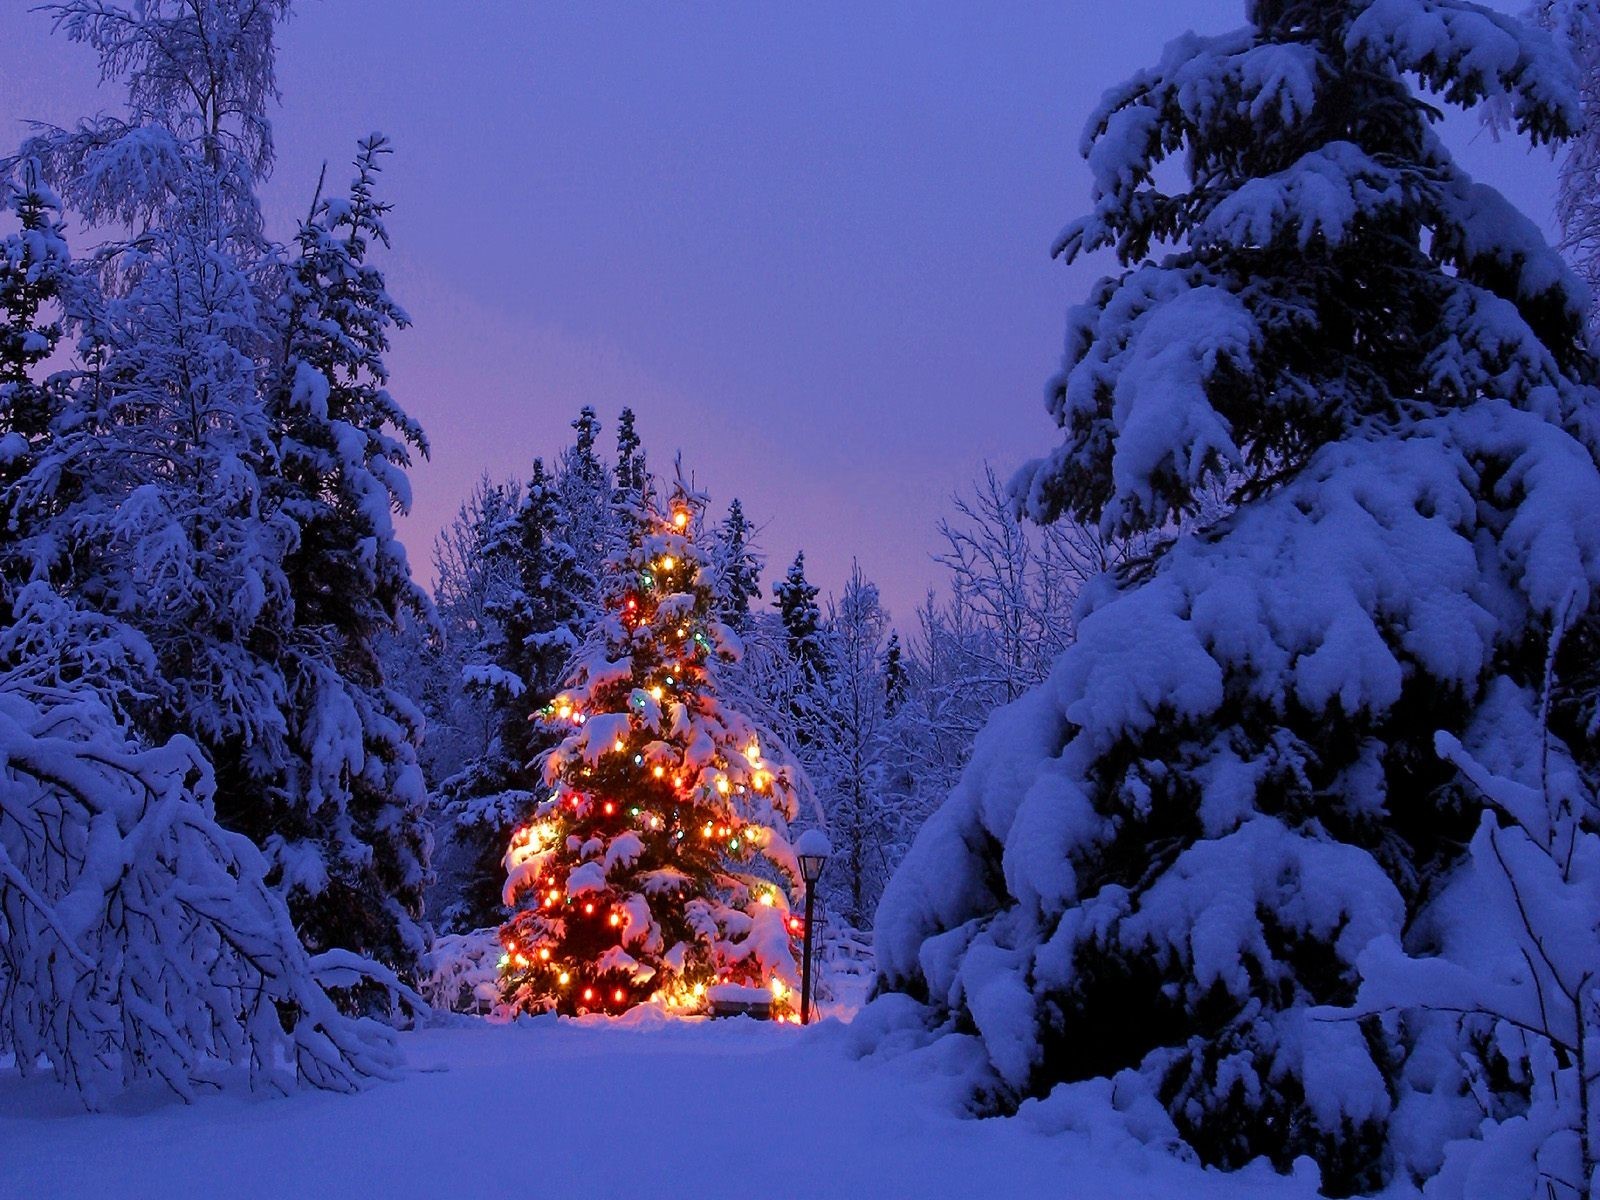 General 1600x1200 Christmas Christmas tree winter snow Christmas lights forest holiday outdoors cold ice trees